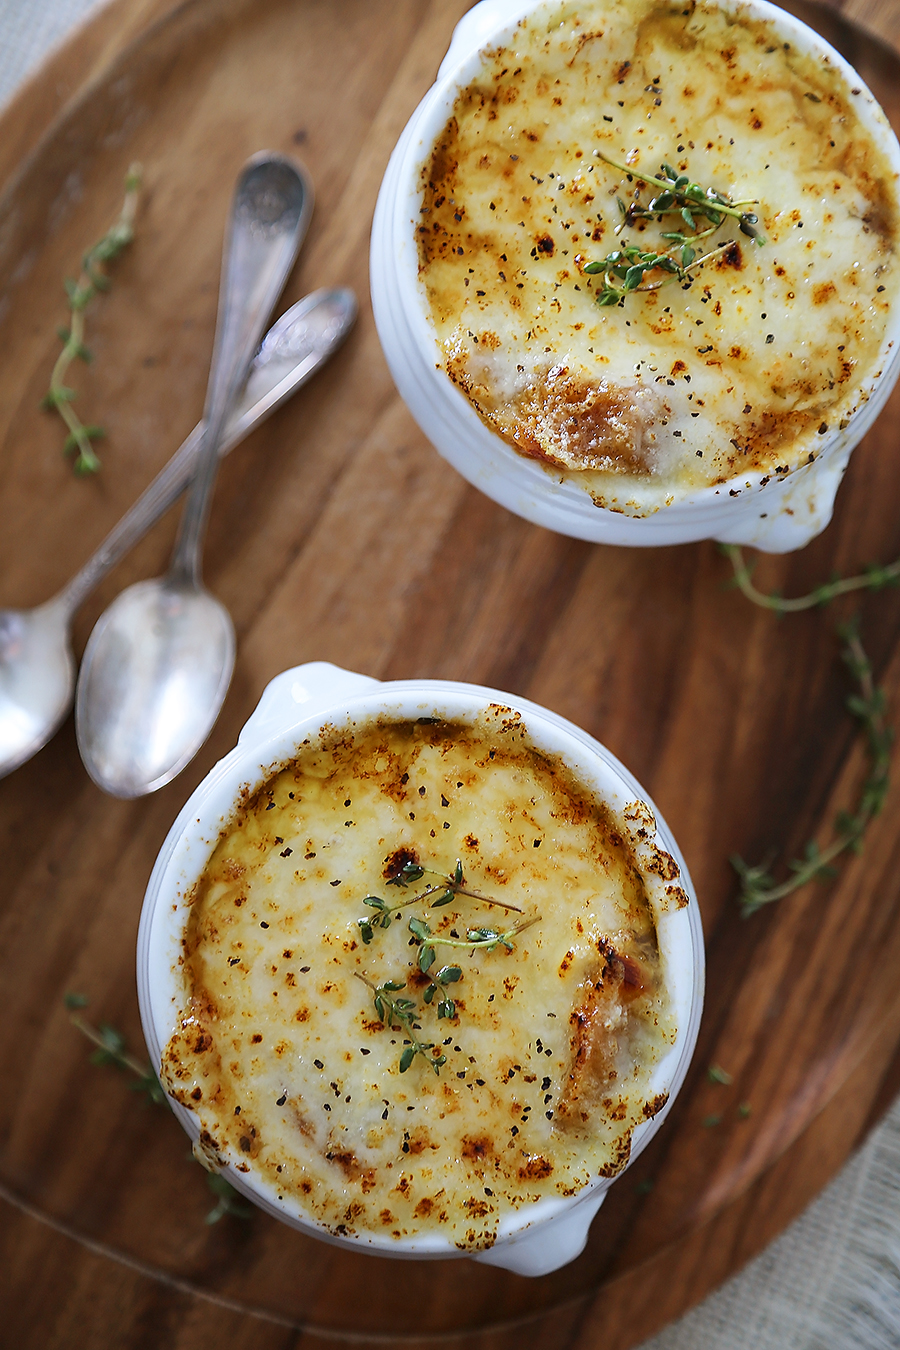 Easy French Onion Soup - Fragrant, cheesy and so comforting! Caramelized onions, beef stock and white (or red) cooking wine mingle into a luxurious medley in this classic French dish. Thecomfortofcooking.com